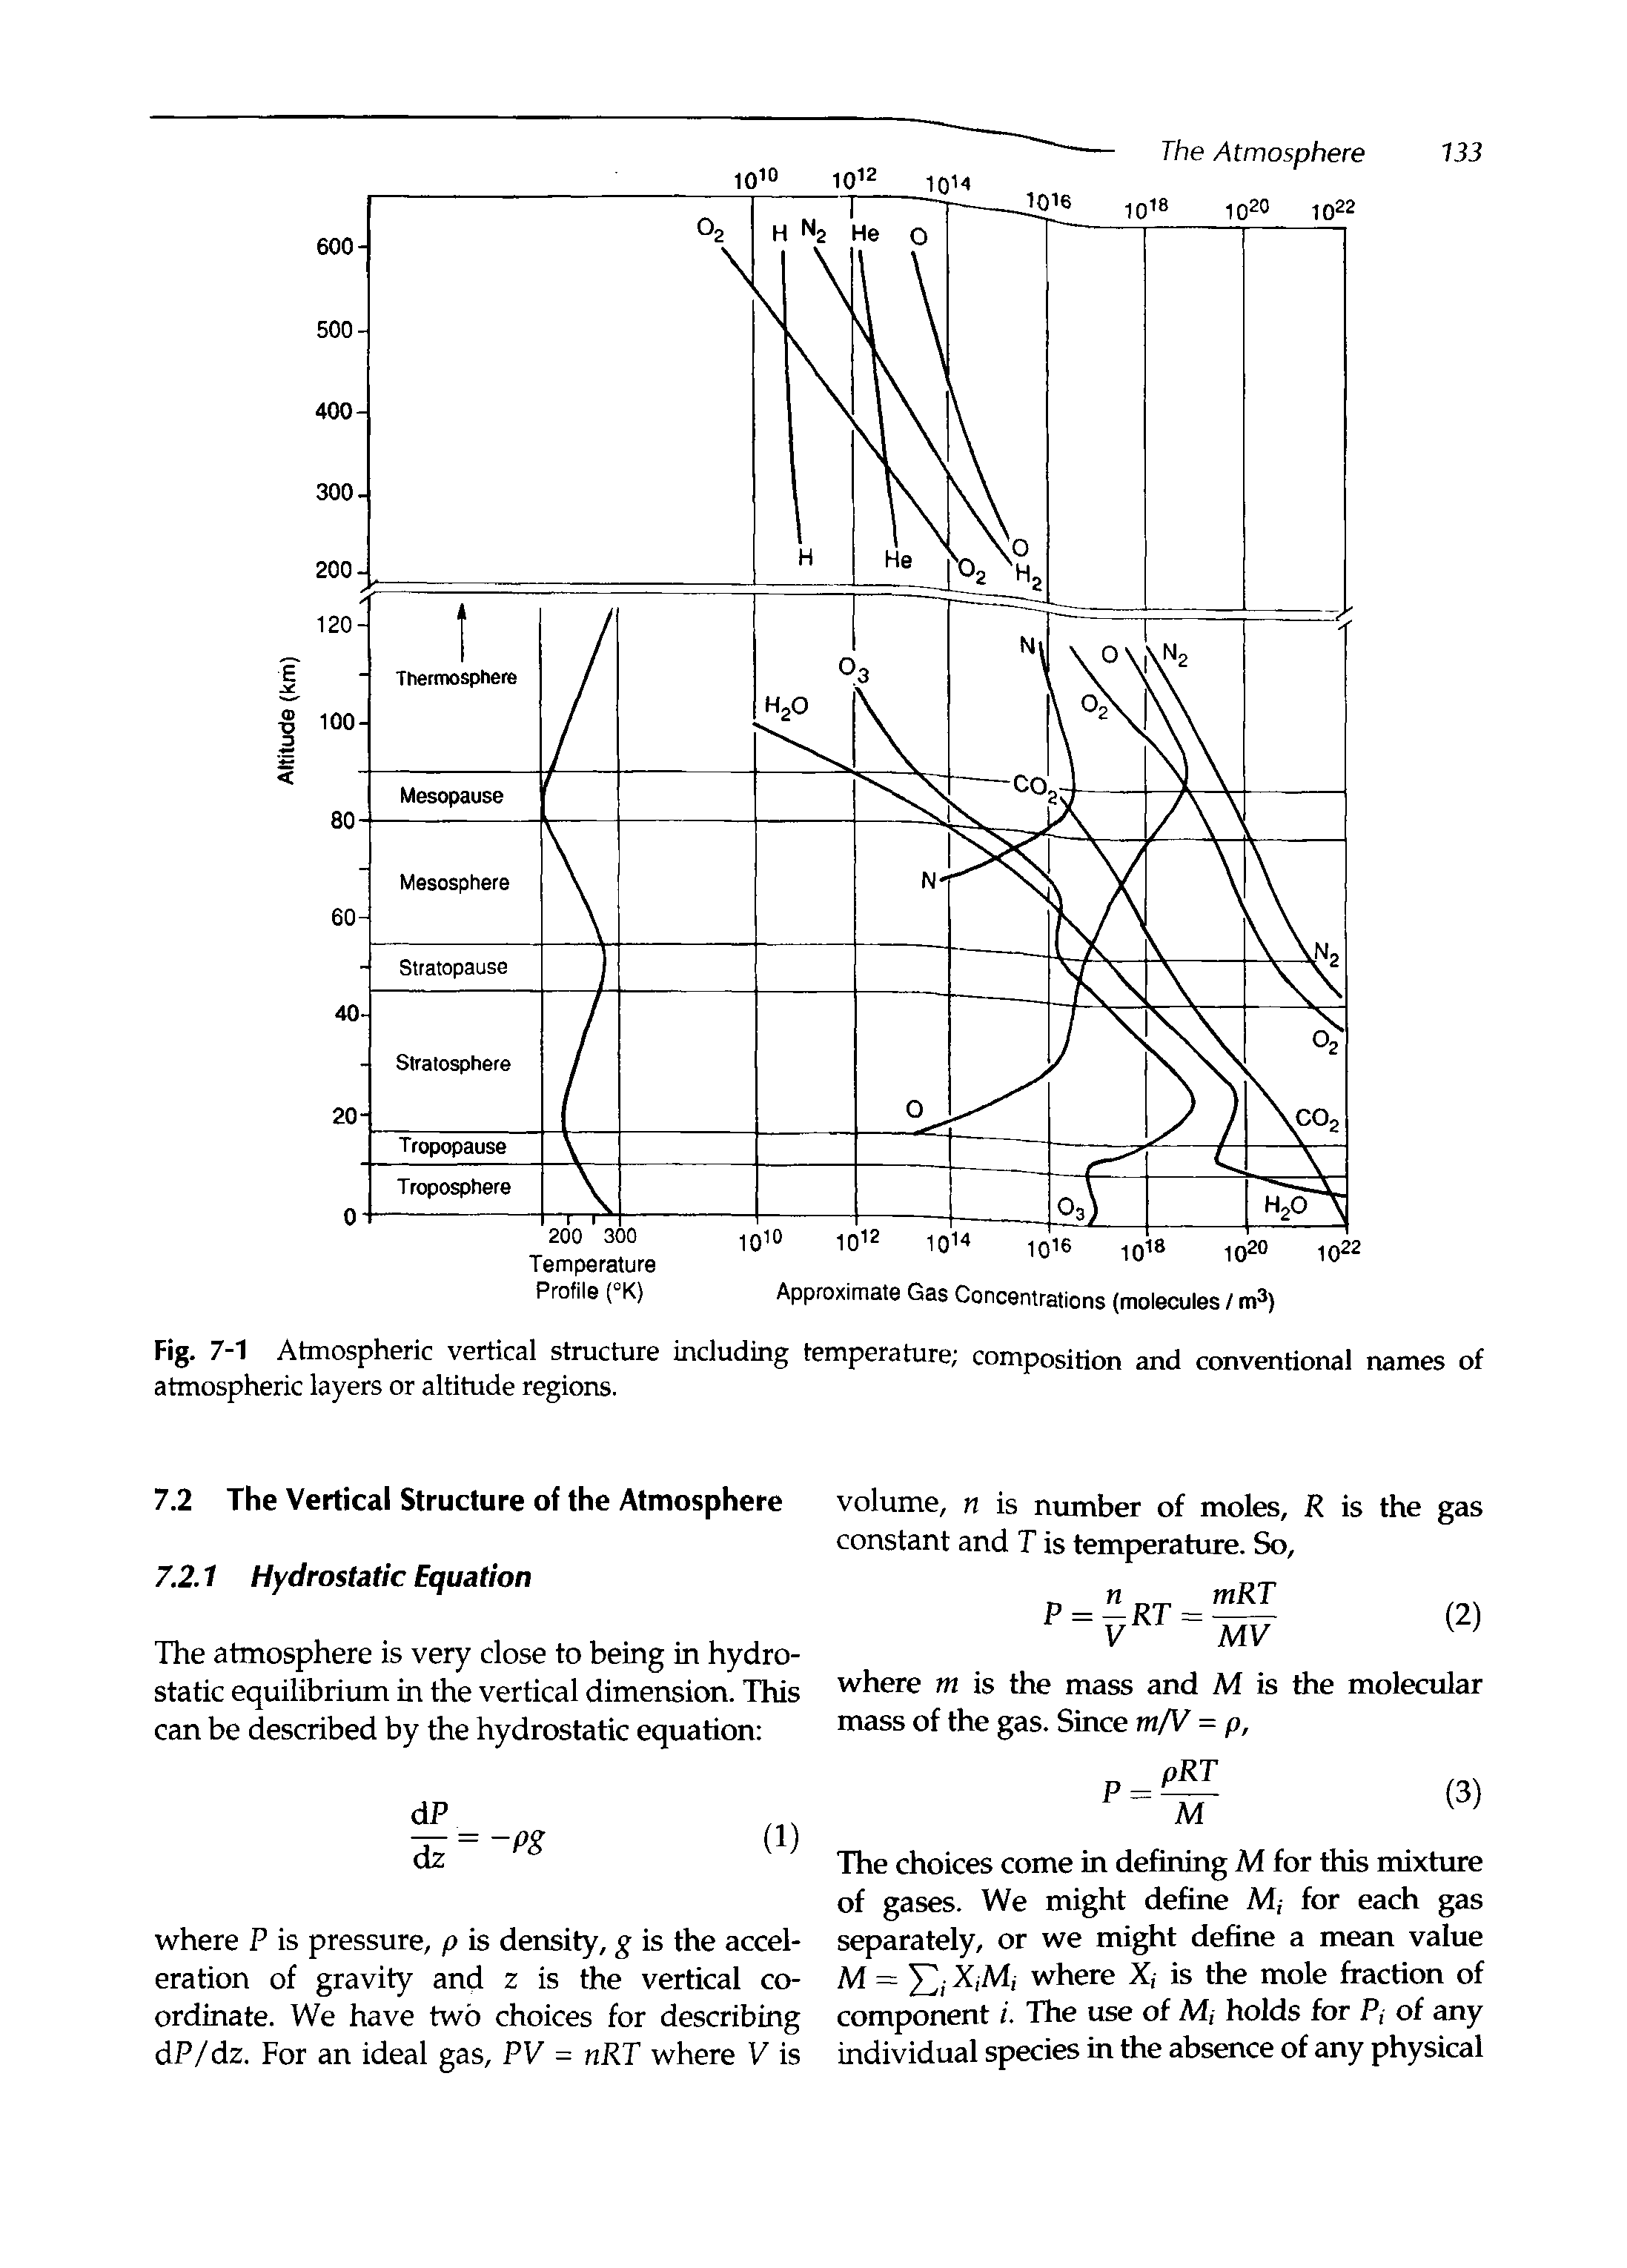 Fig. 7-1 Atmospheric vertical structure including temperature composiHon and conventional names of atmospheric layers or altitude regions.